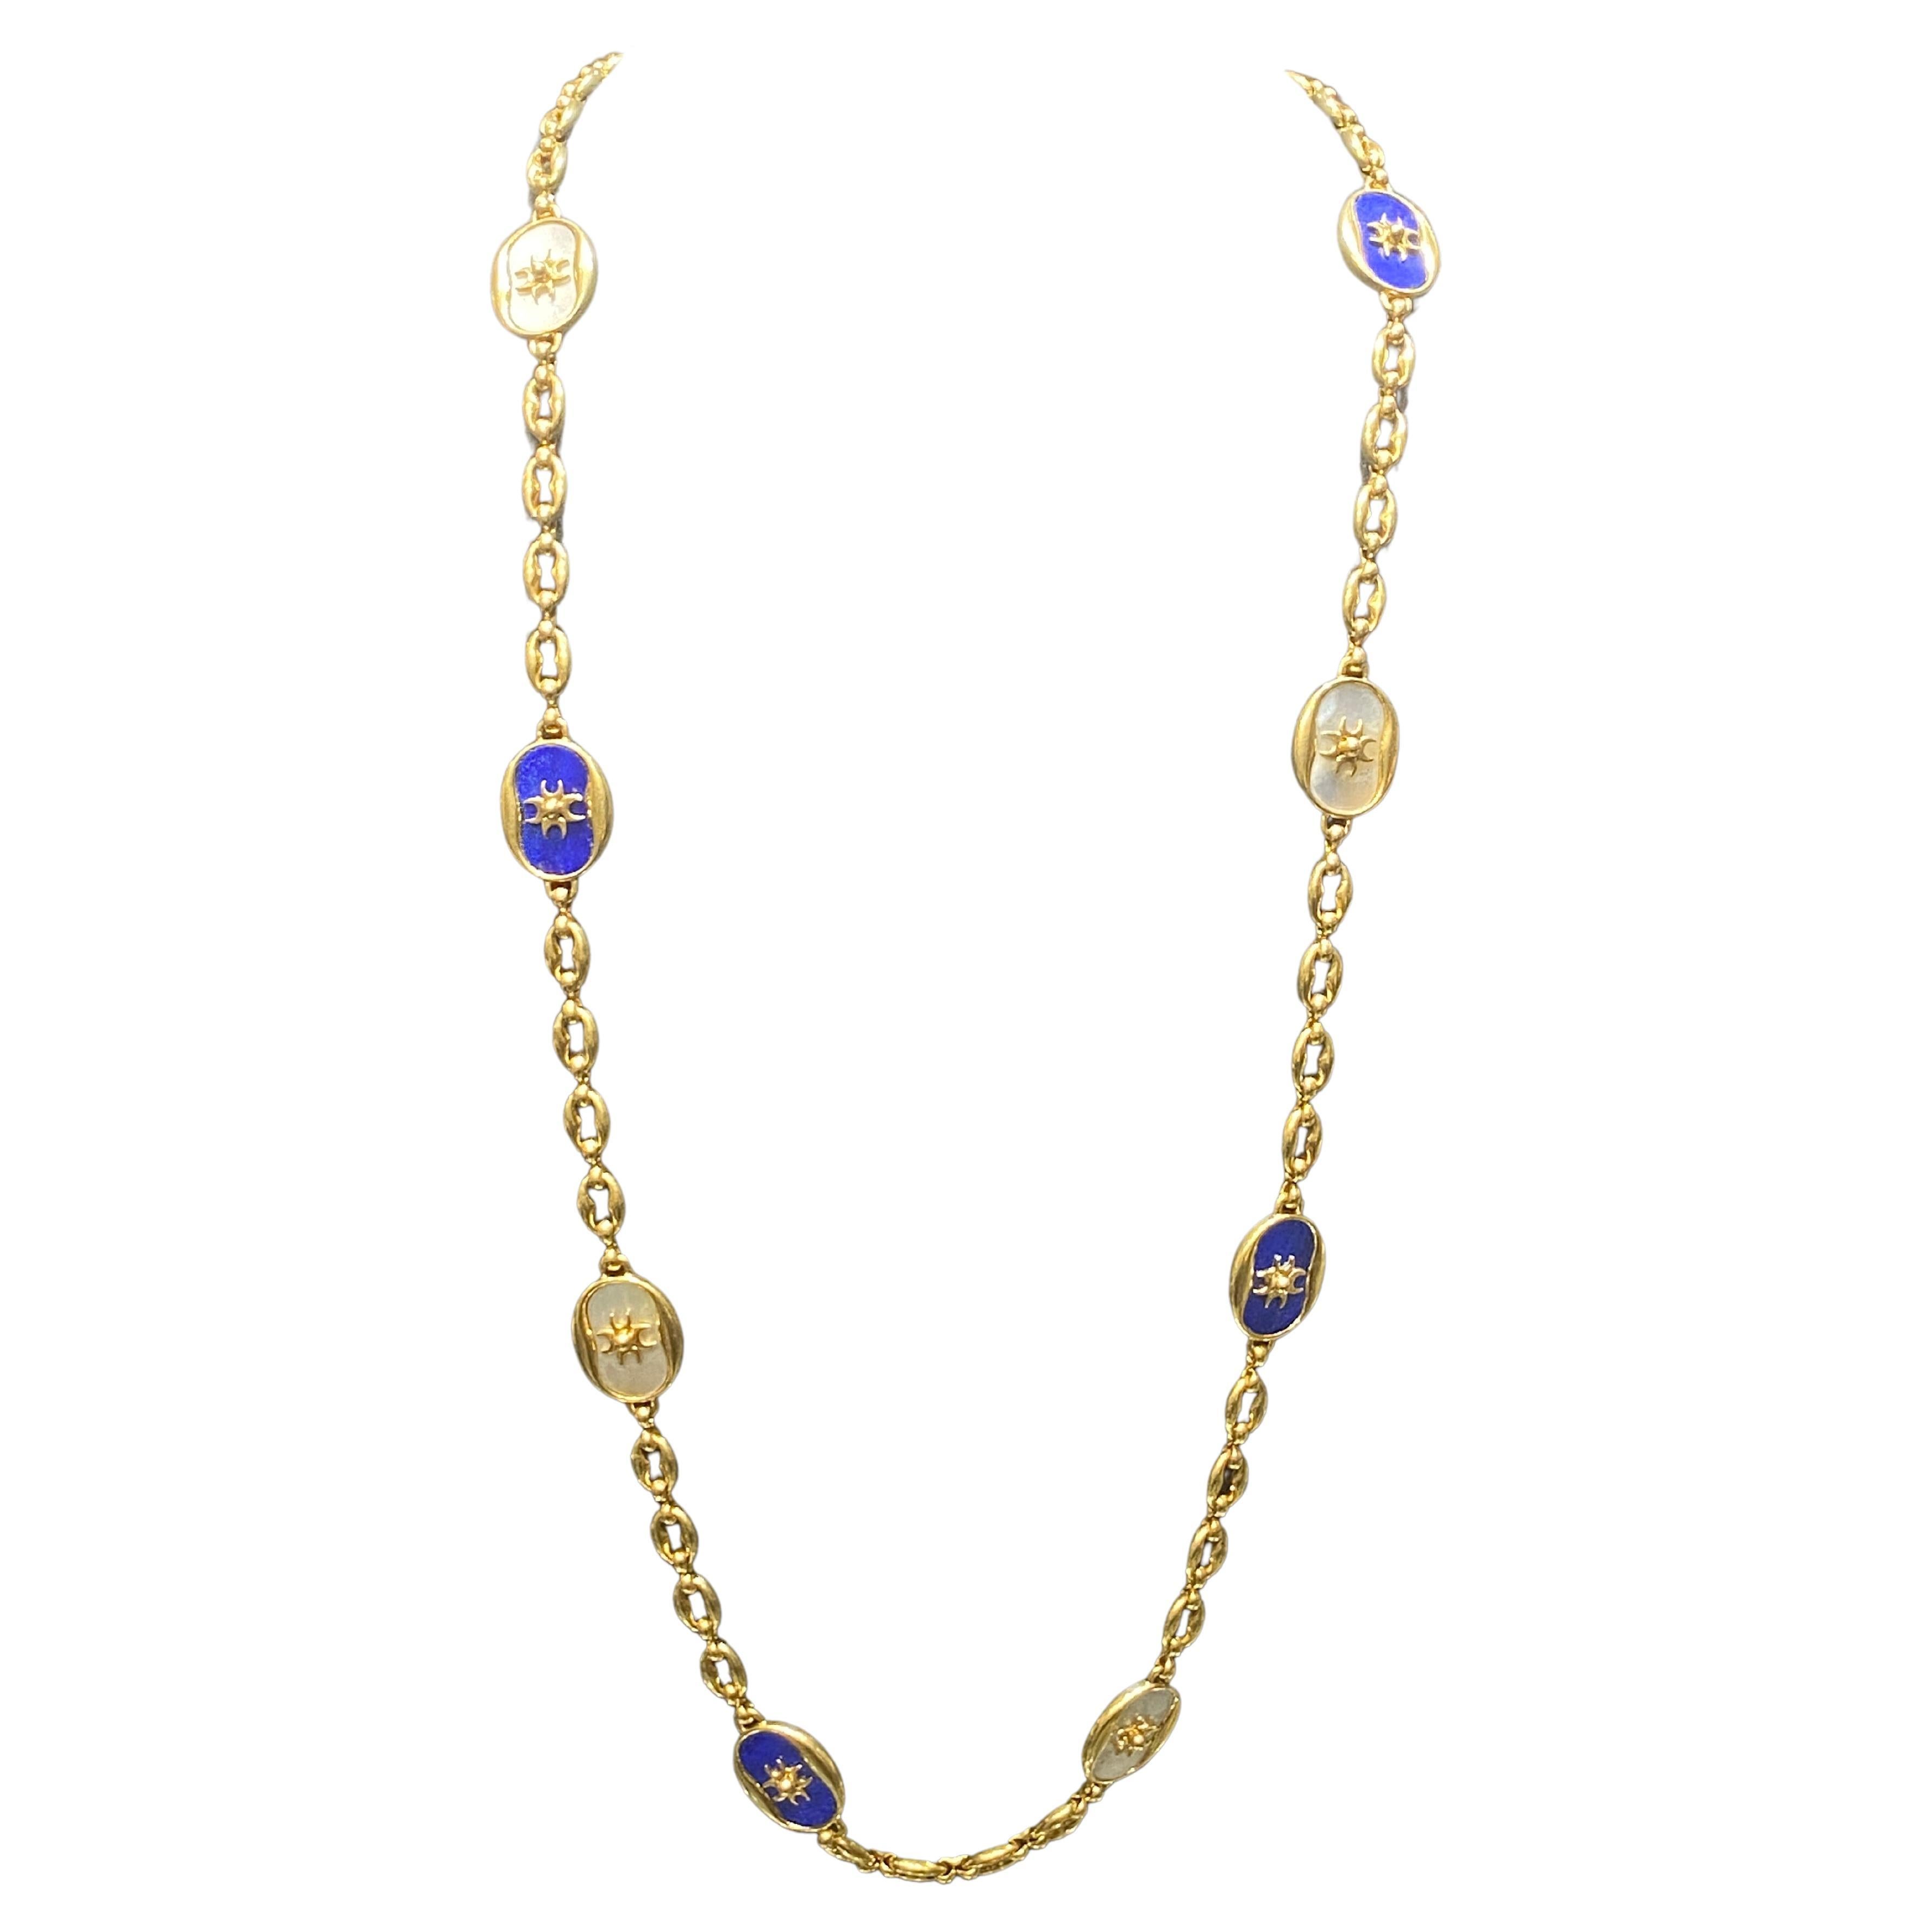 Cartier mother of pearl and lapis necklace carrying Jean-Jacques Cartier's mark For Sale